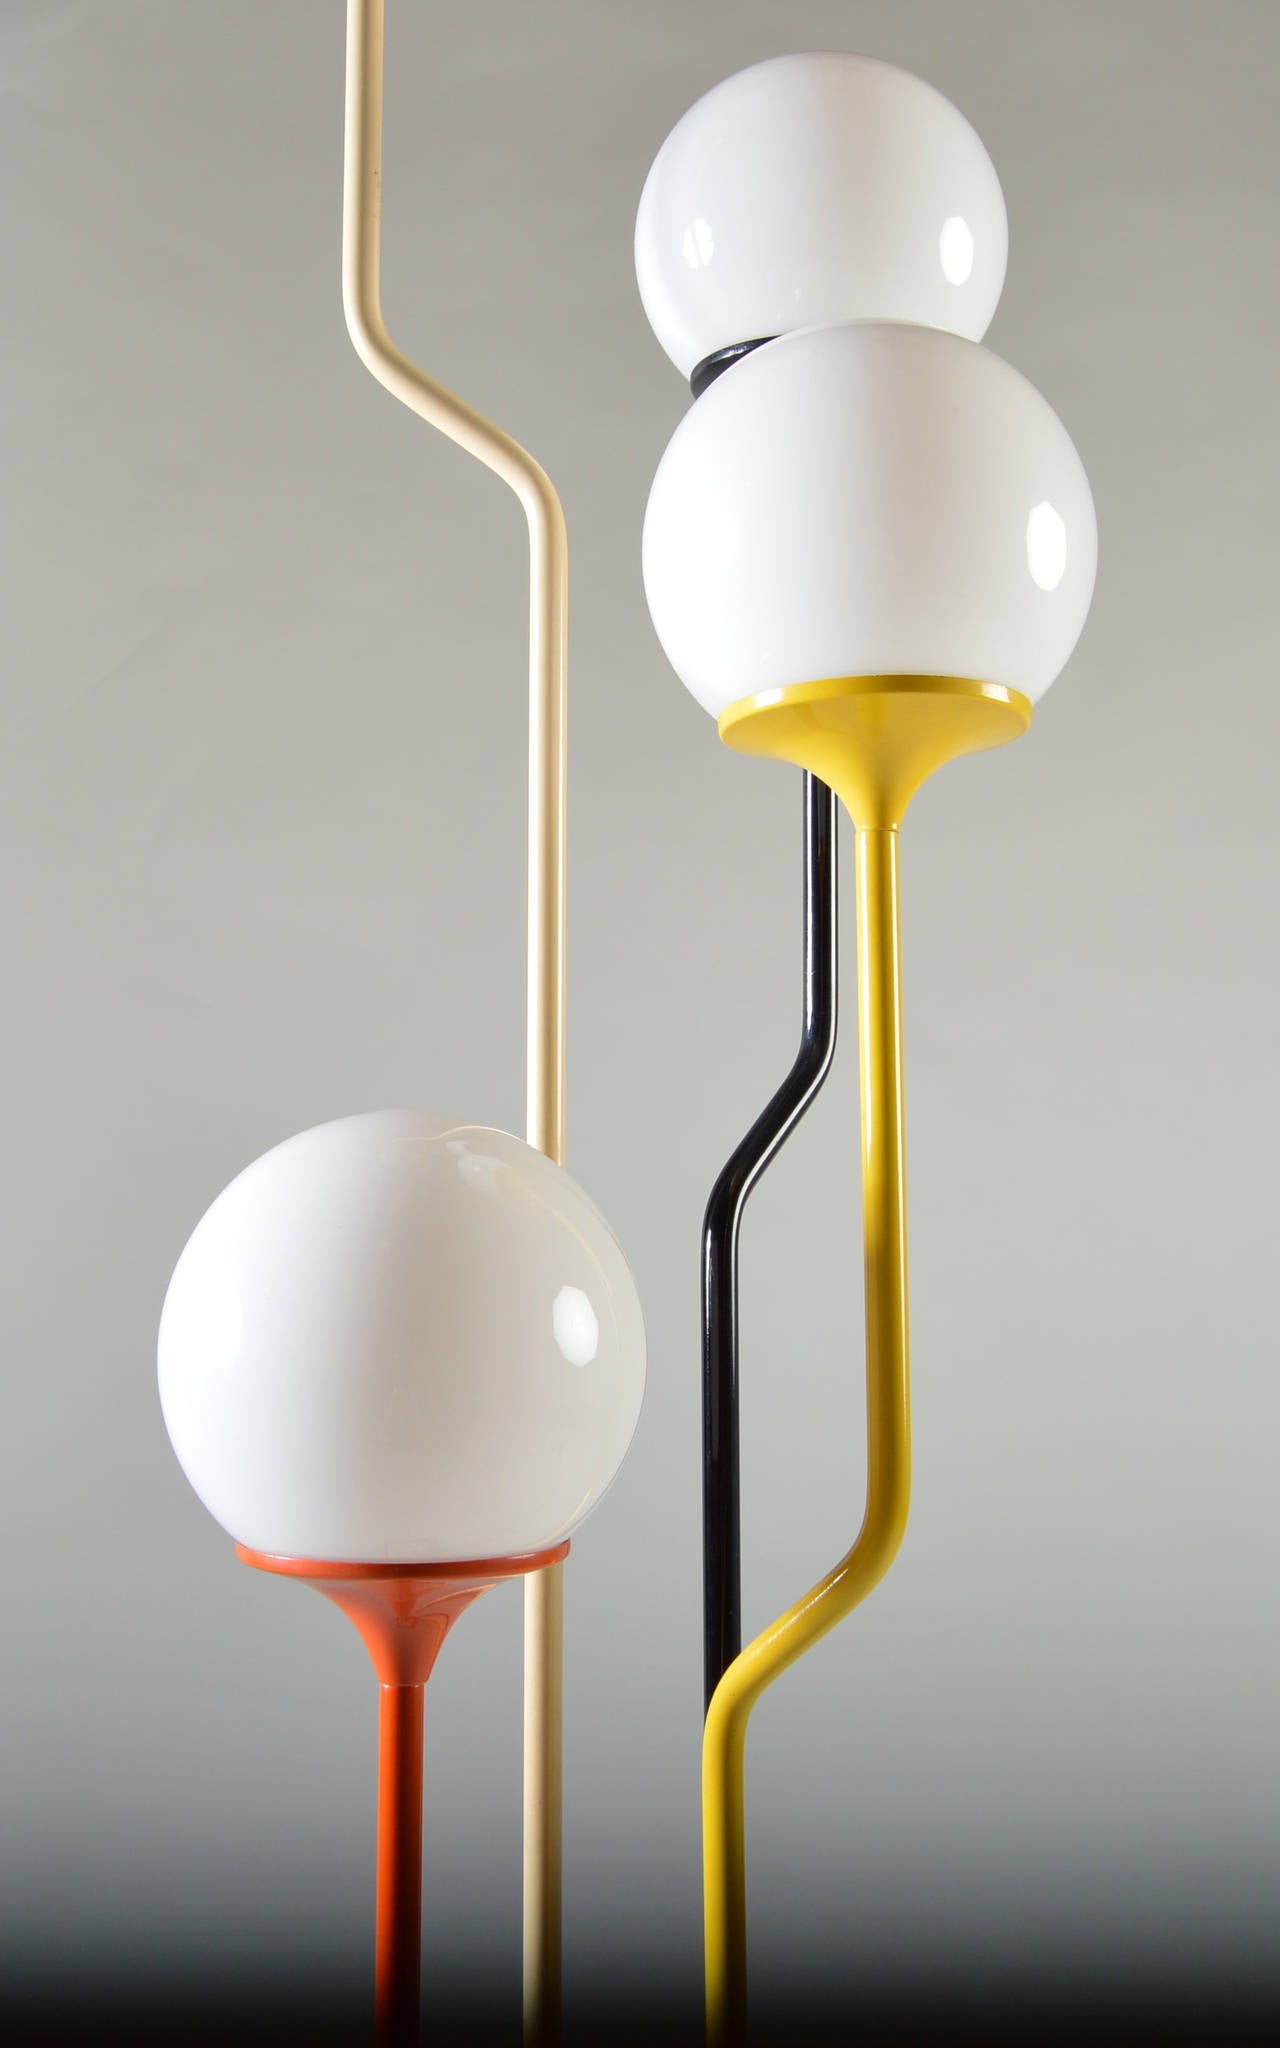 An original multicolored floor lamp designed by Goffredo Reggiani. Four-way light switch that is triggered at the base.